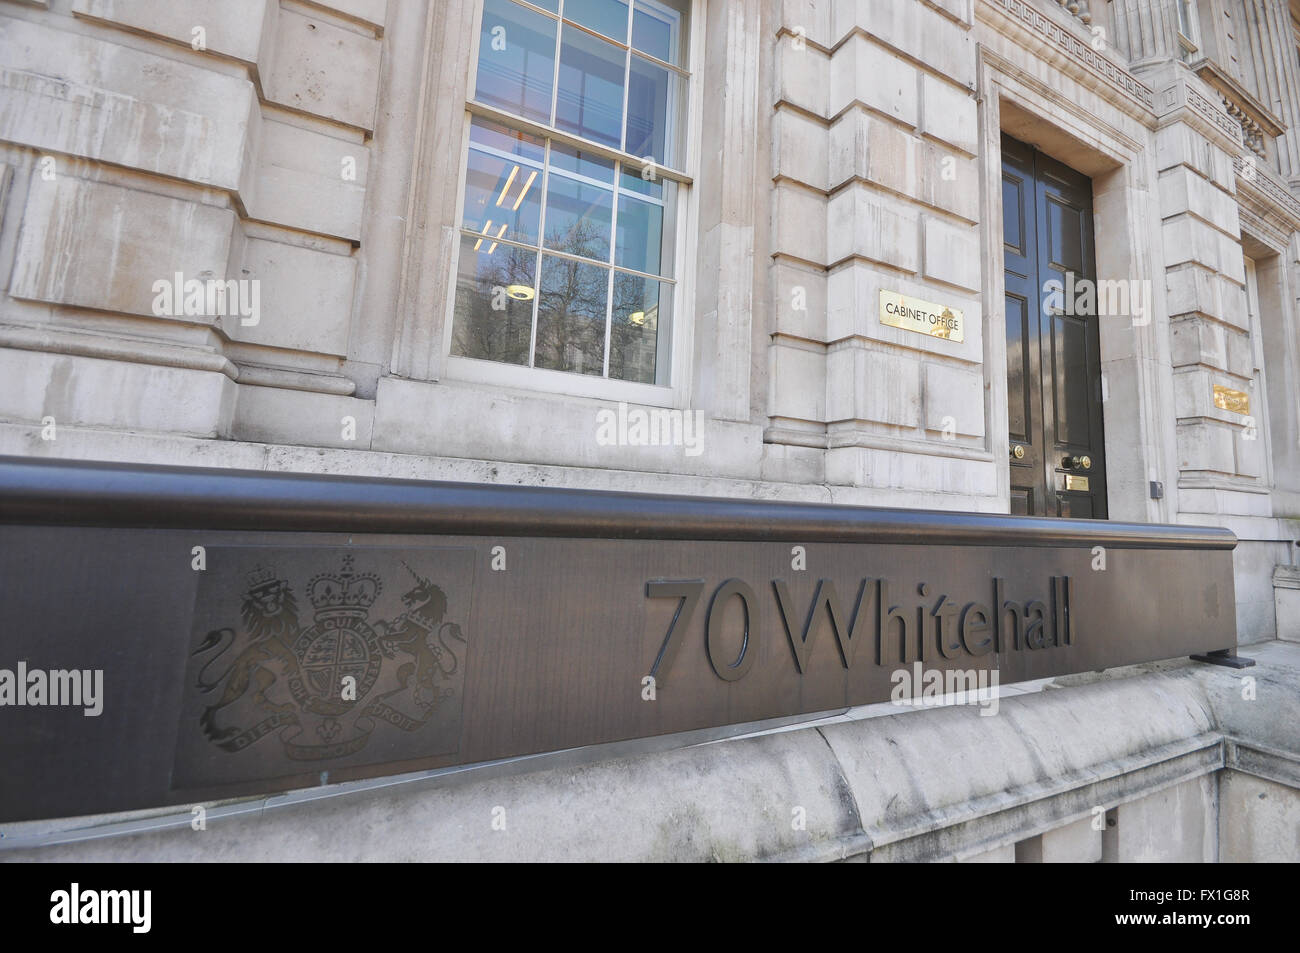 Cabinet Office and 70 Whitehall is a department of the Government of the United Kingdom. London Stock Photo